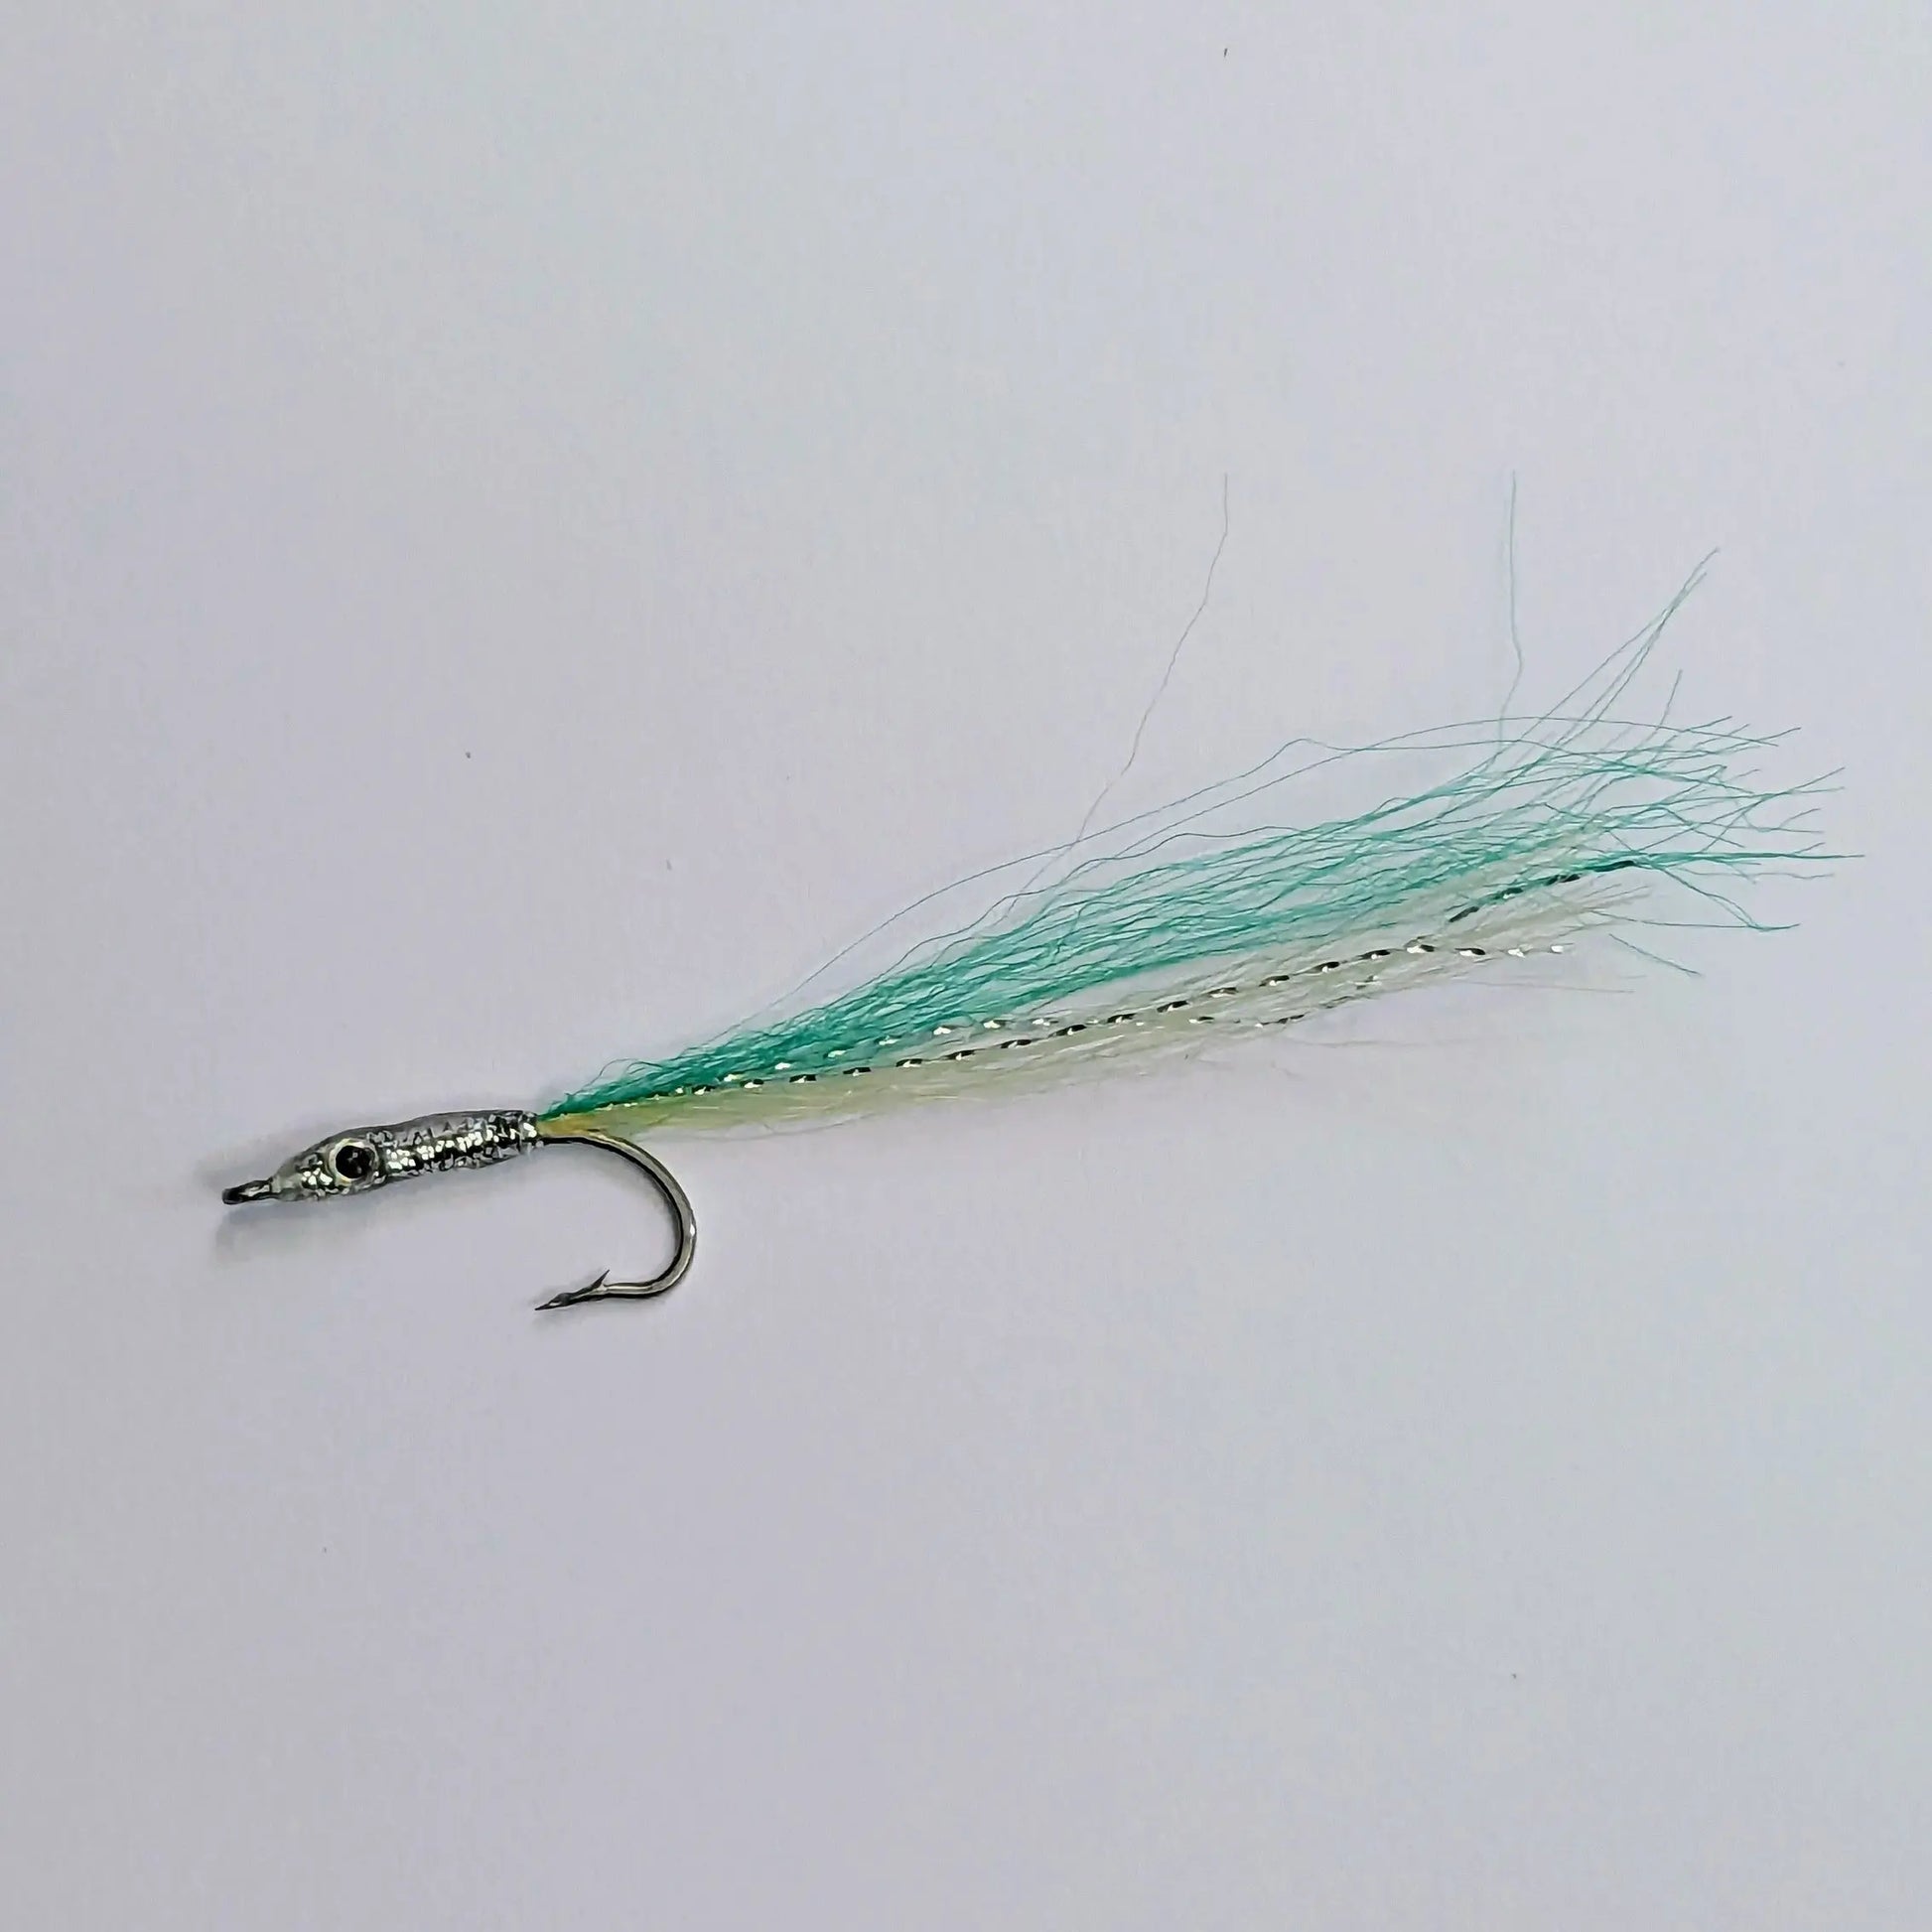 Sandeel Lures for Saltwater Fly Fishing. - www.nafni.com